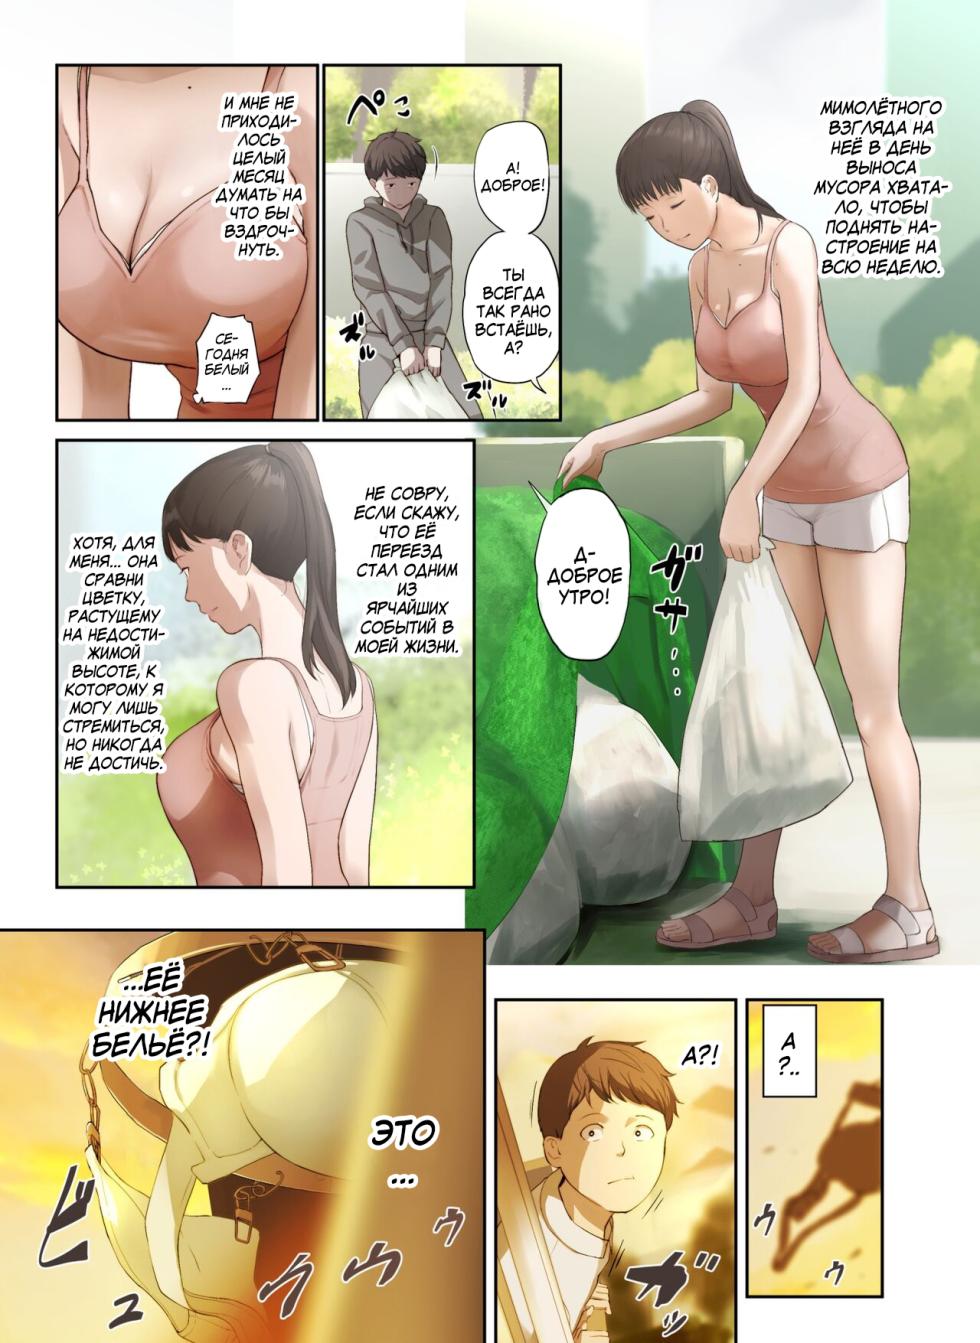 [Chinjao Girl. (Special G)]  Let’s Talk About the Story of A Miracle that Happened When I Stole the Underwear of the Lady Next Door - Page 5